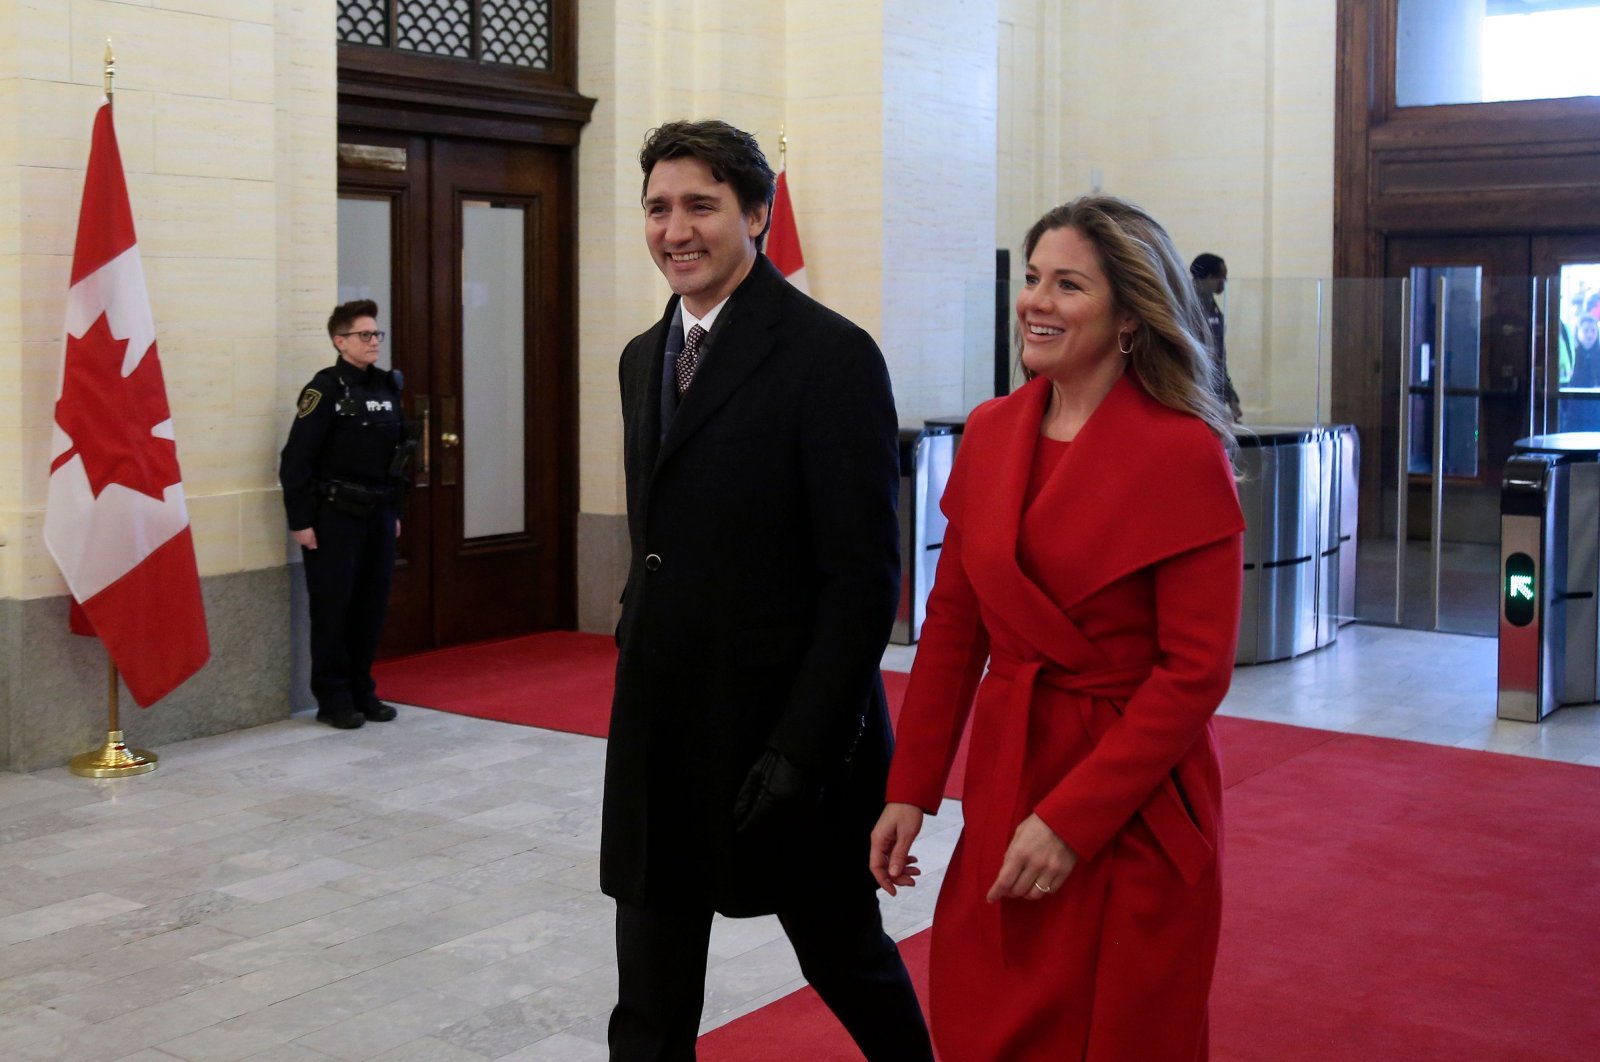 In this file photo, Canadain Prime Minister Justin Trudeau and his wife Sophie Gregorie-Trudeau arrive for the throne speech at the Senate of Canada, Ottawa, Dec. 5, 2019. (AFP Photo)